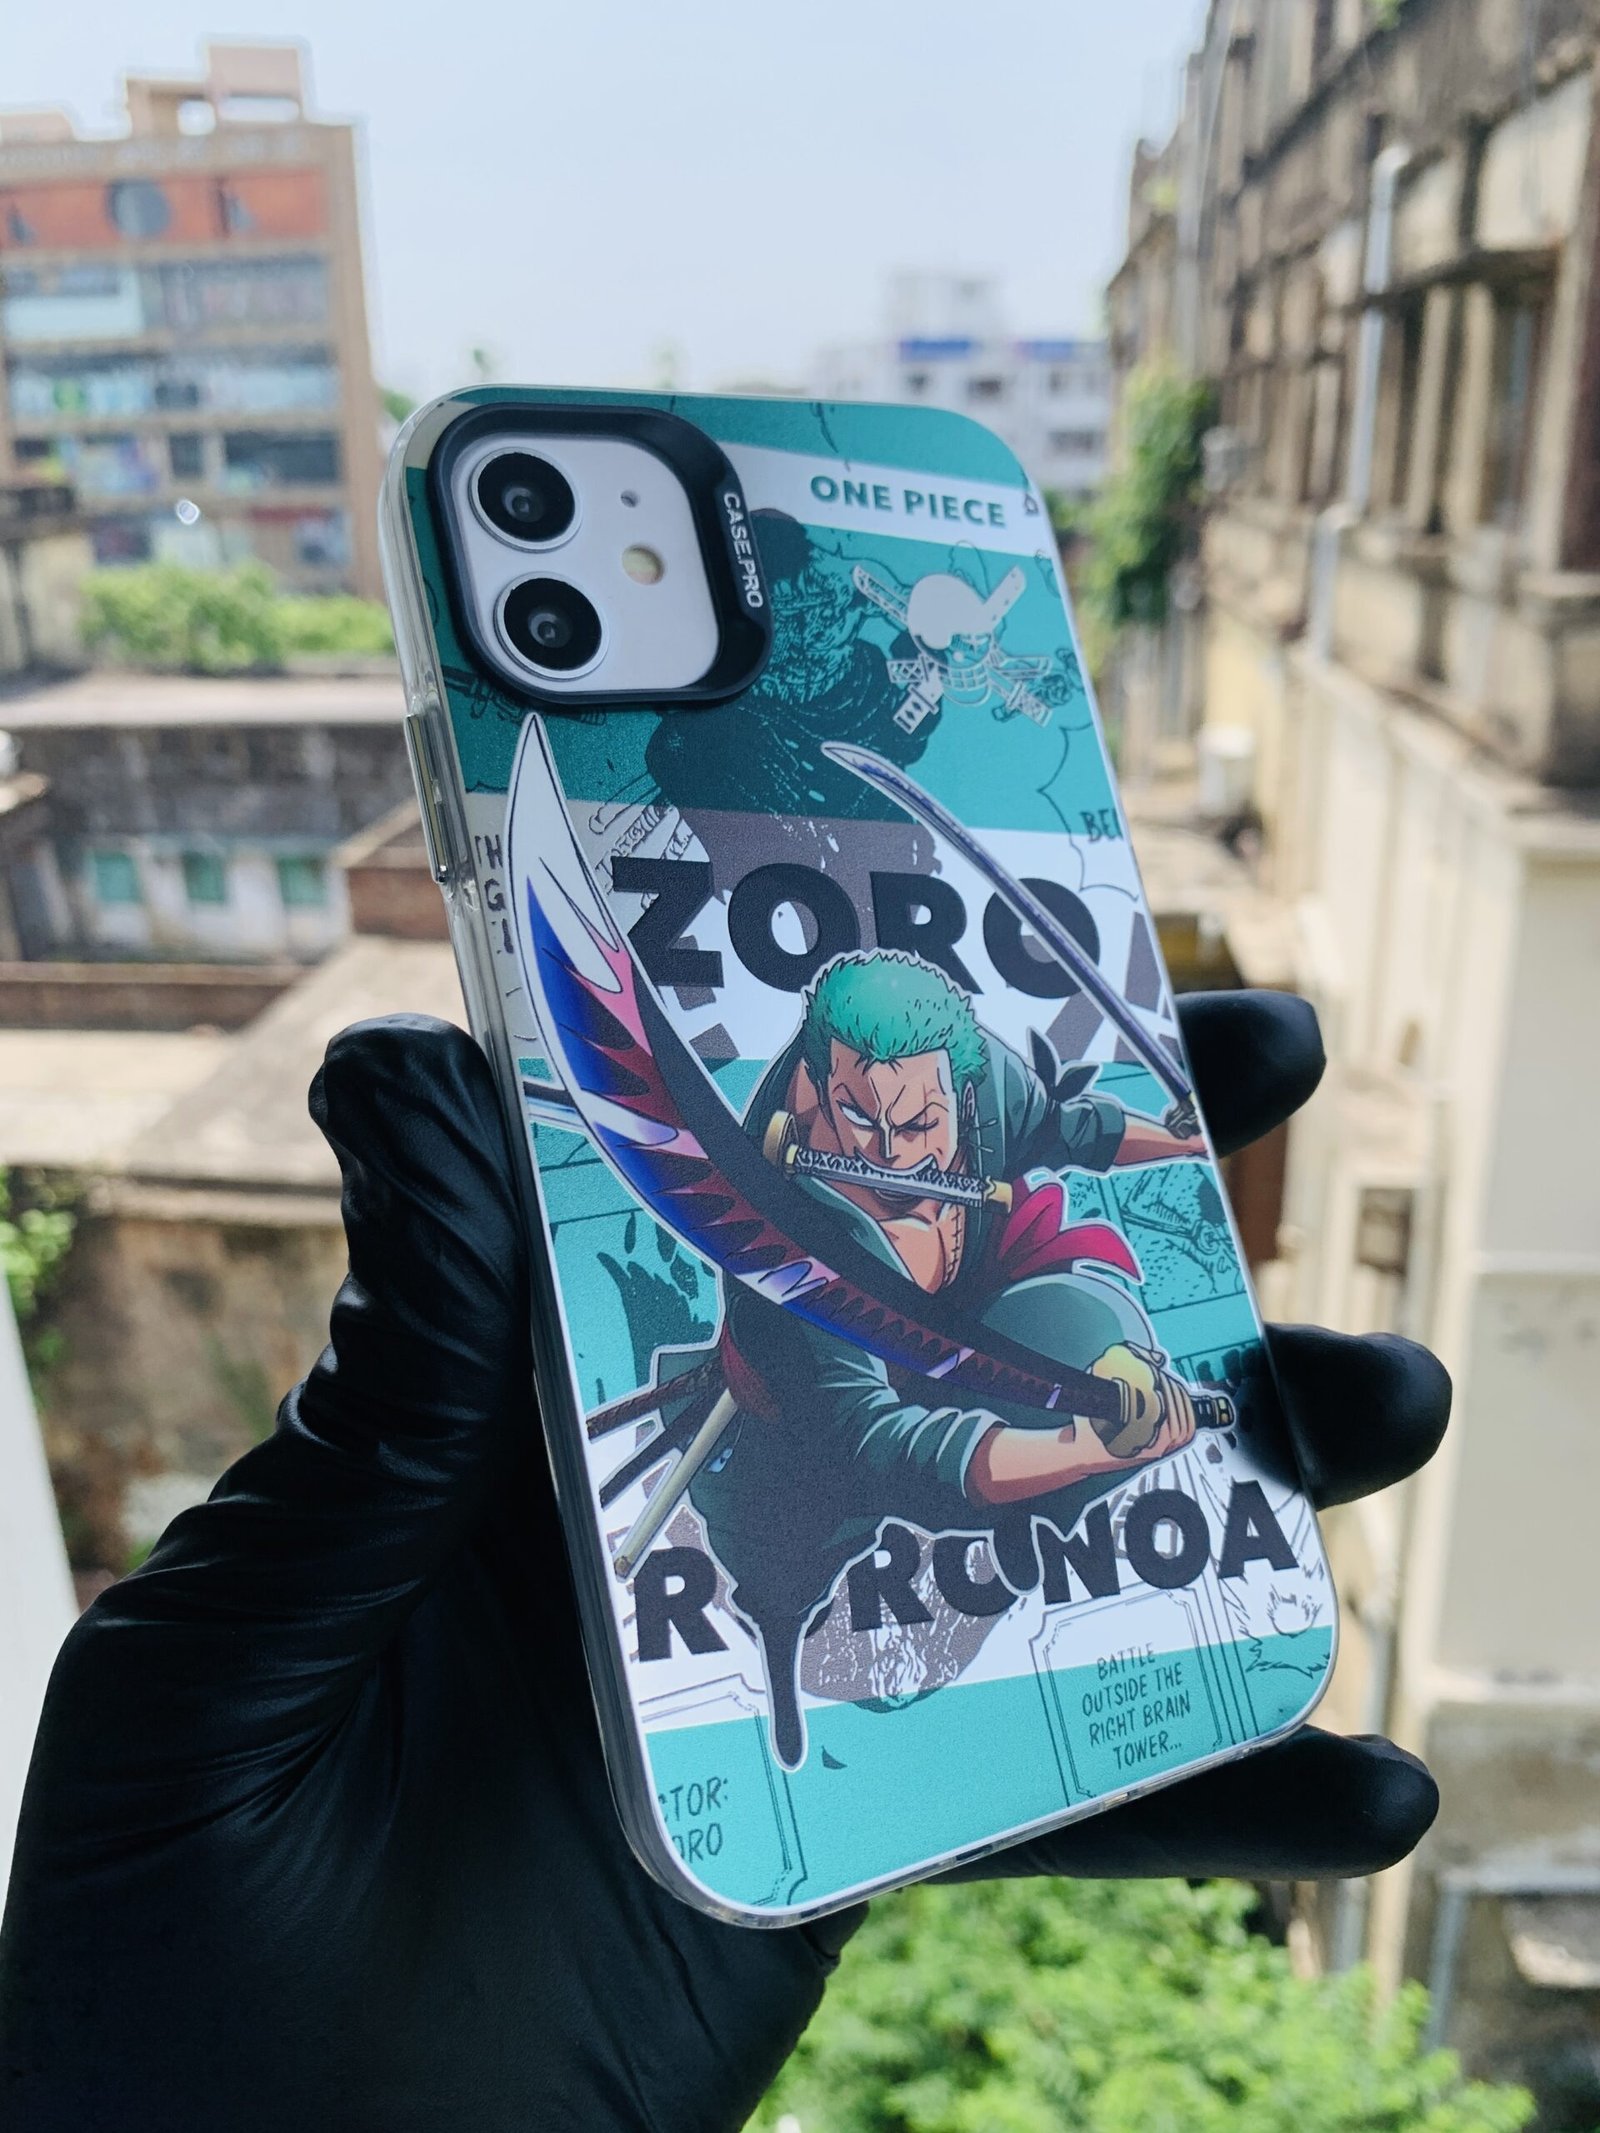 iPhone 11 Pro Case Anime Cartoon 140 iPhone 11 Pro Cases for Men Women Boy  Girls FanLuxury Design HD Fashion Pattern BackSoft Silicone TPU Shock  Clear Protective Case for iPhone 11 Pro 